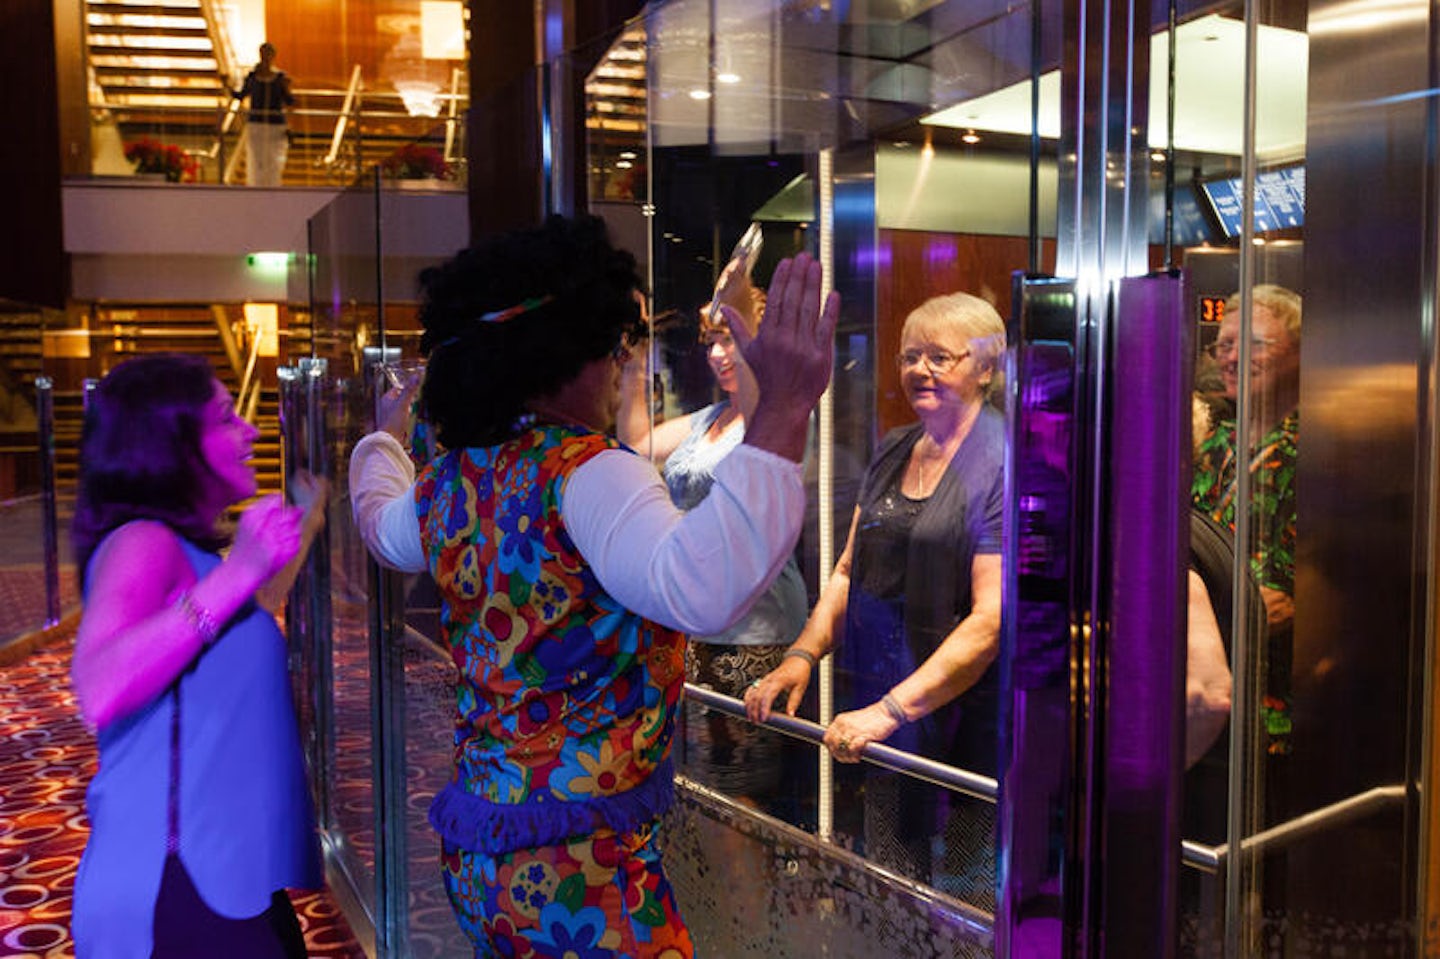 70s Party on Celebrity Silhouette